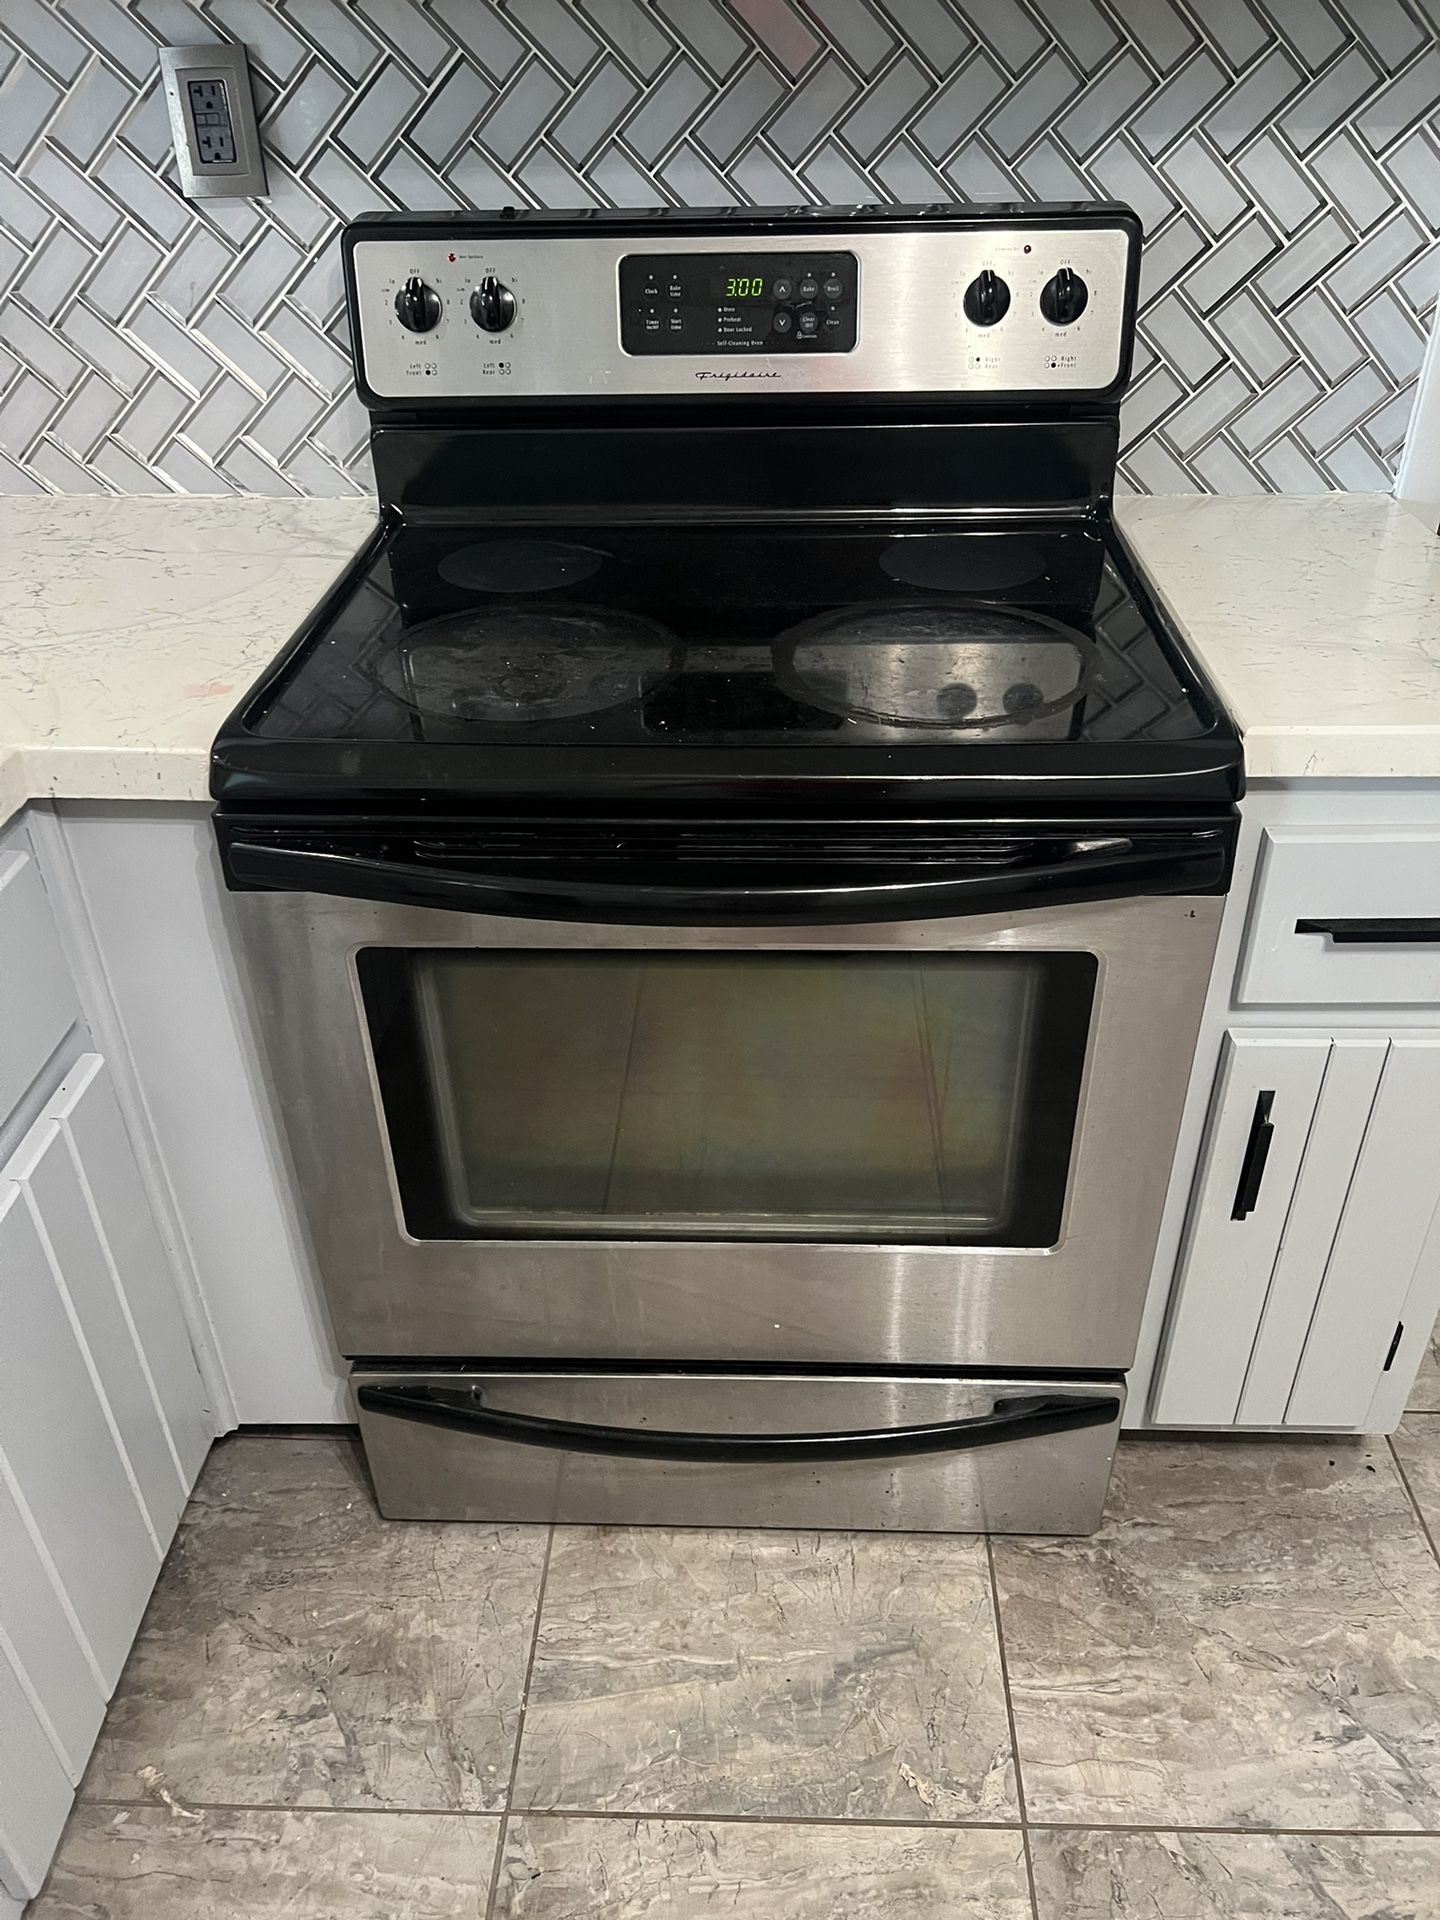 Kitchen Appliances Set , refrigerator, stove and microwave. Used but good condition.